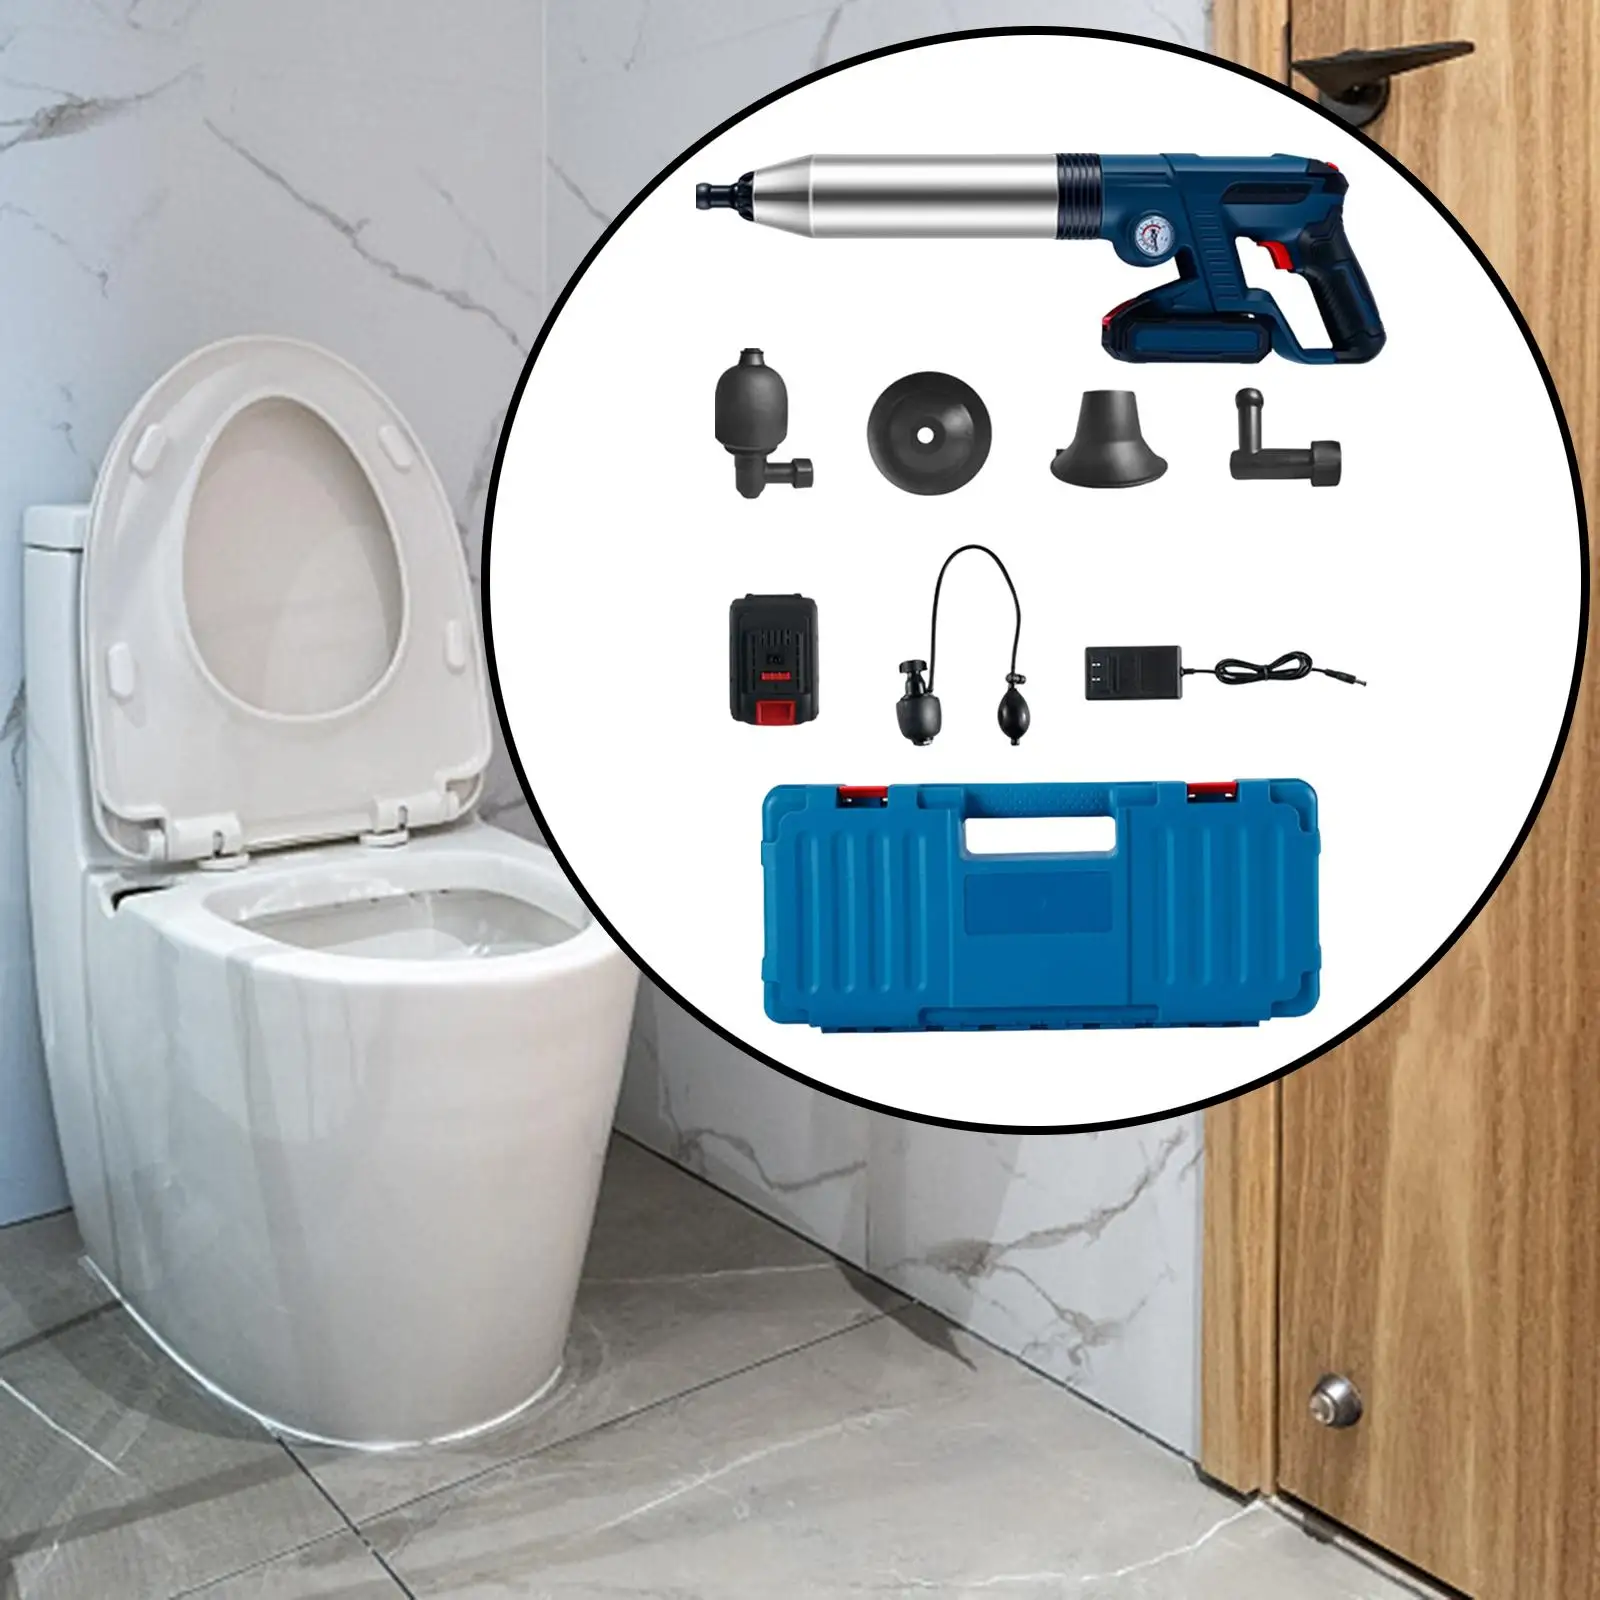 Electric Toilet Dredge Tool Plumbing Tools Toilet Plunger Pipe Unclogger Heavy Duty Drain Clog for Clogged Pipe Bathroom